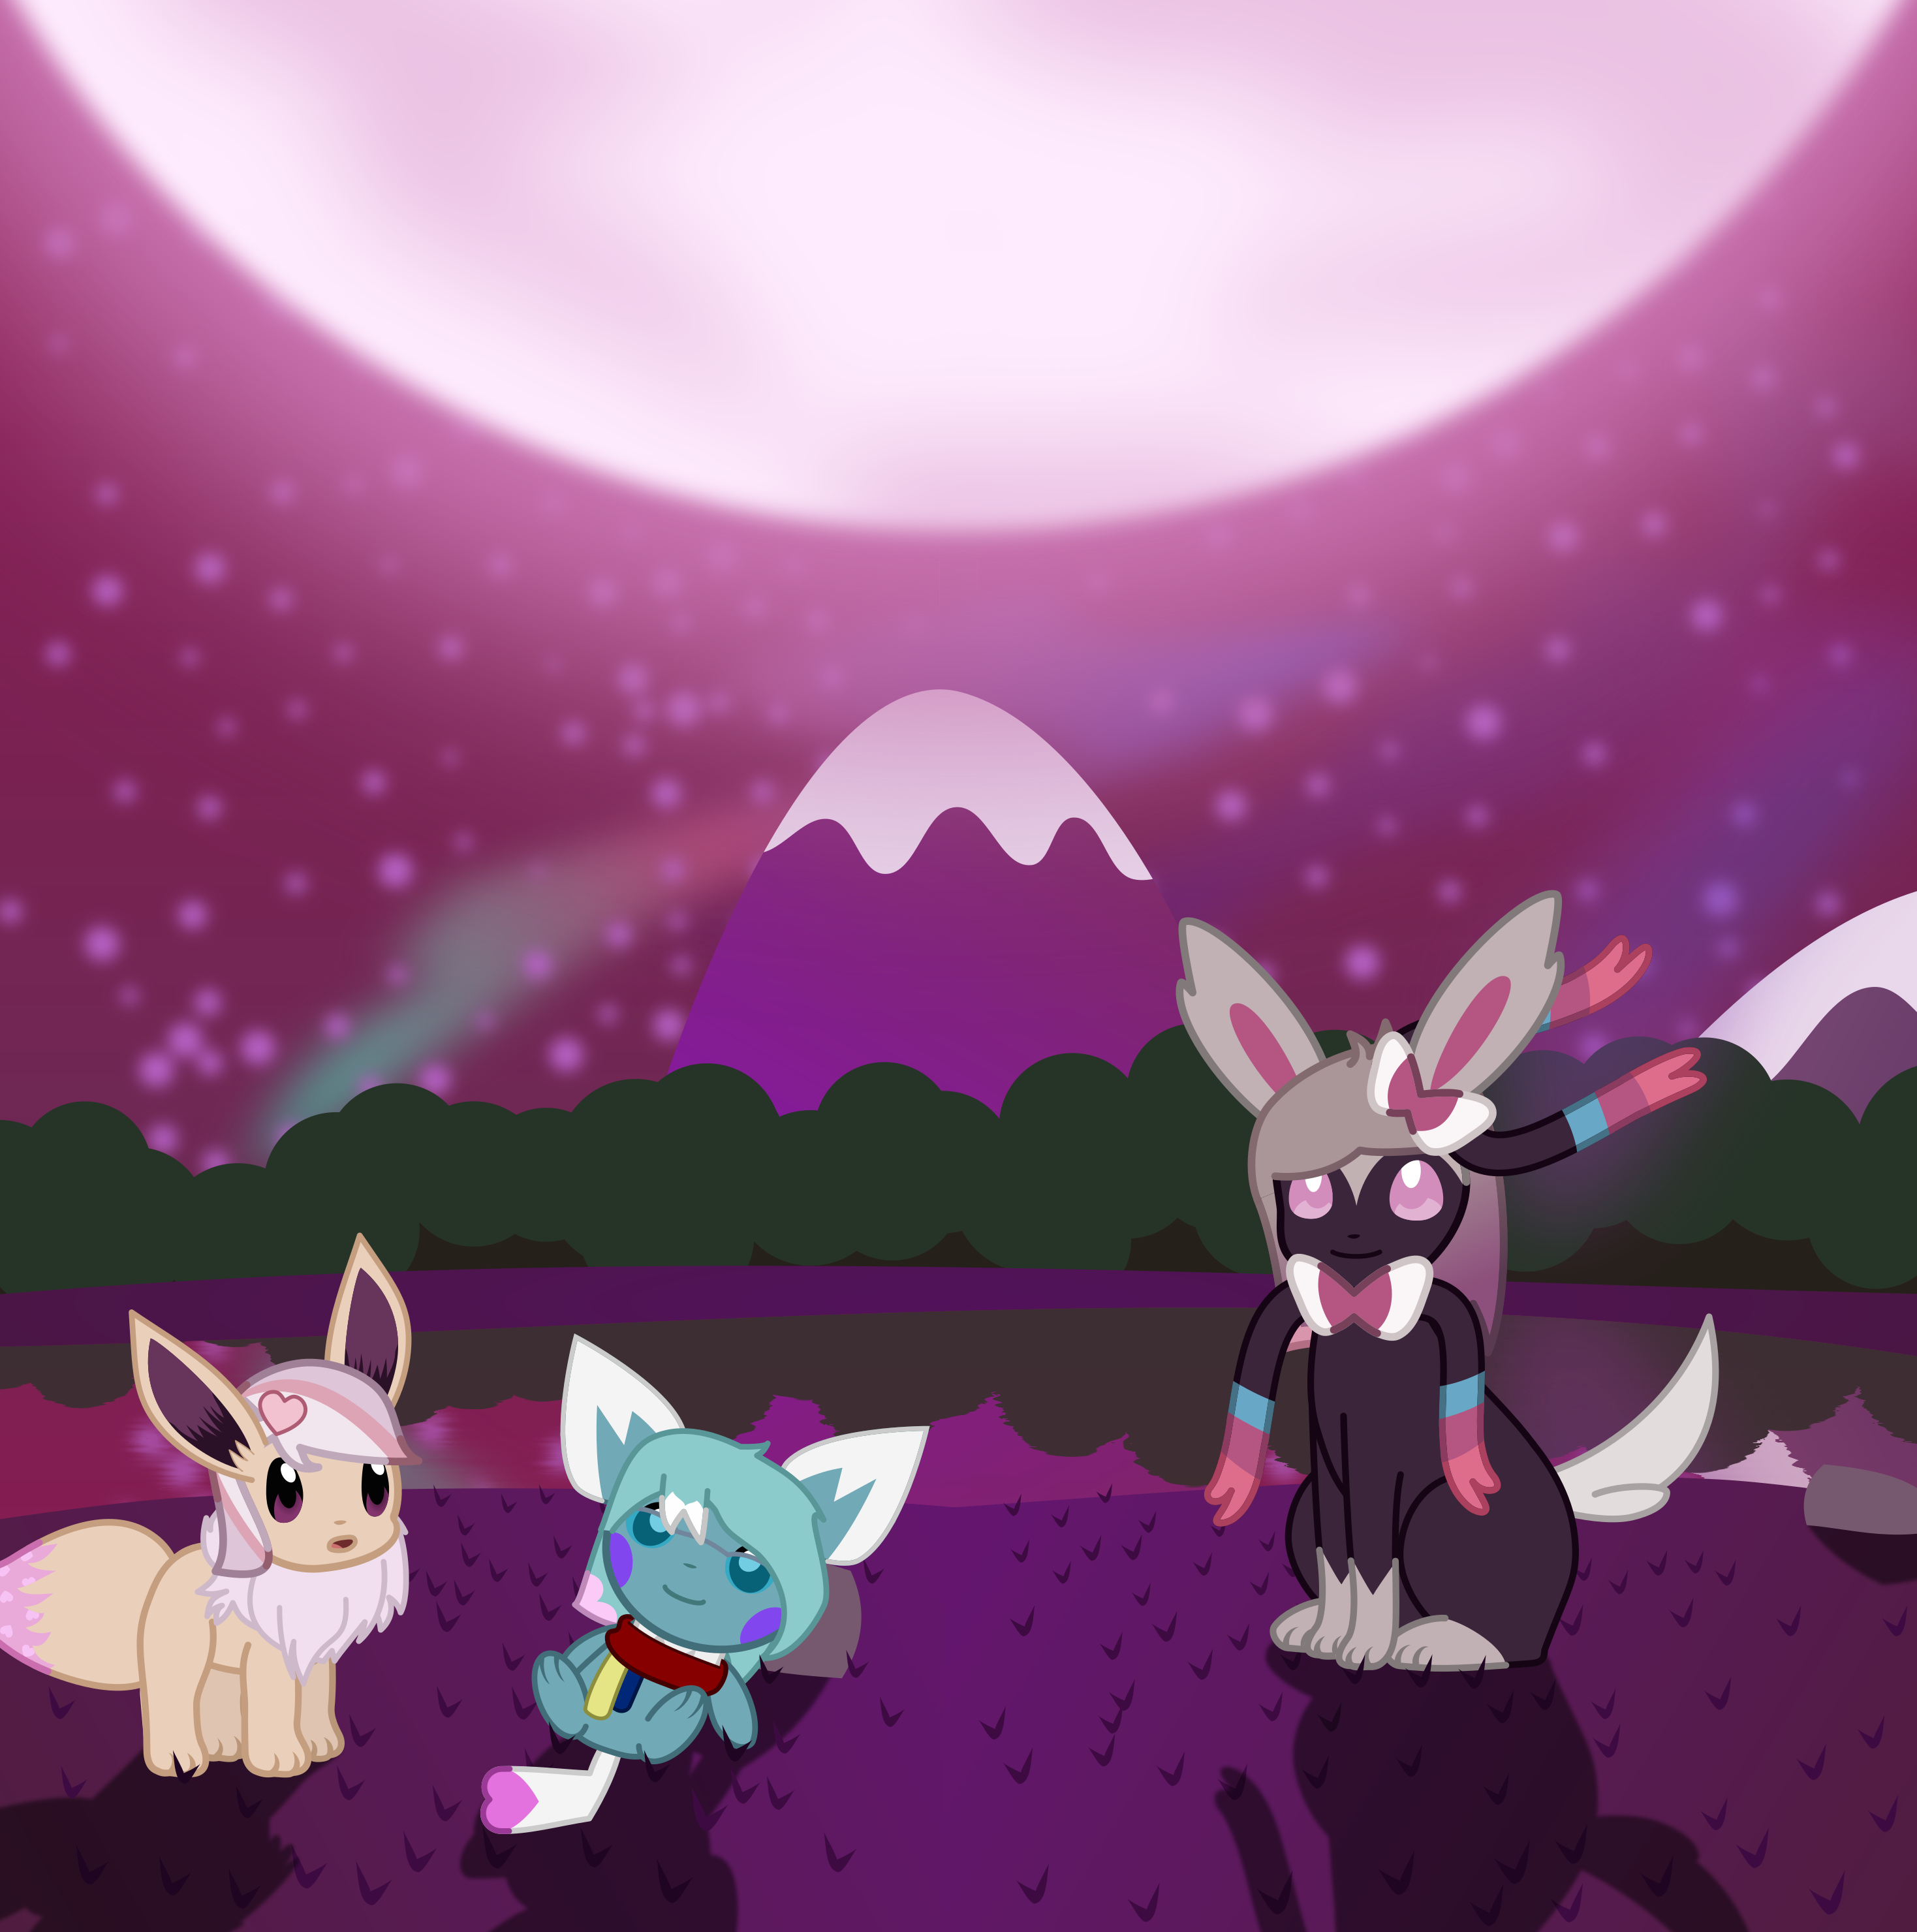 An eevee, pichu, and sylveon all look up at the moon, all standing on a purpleish hill.